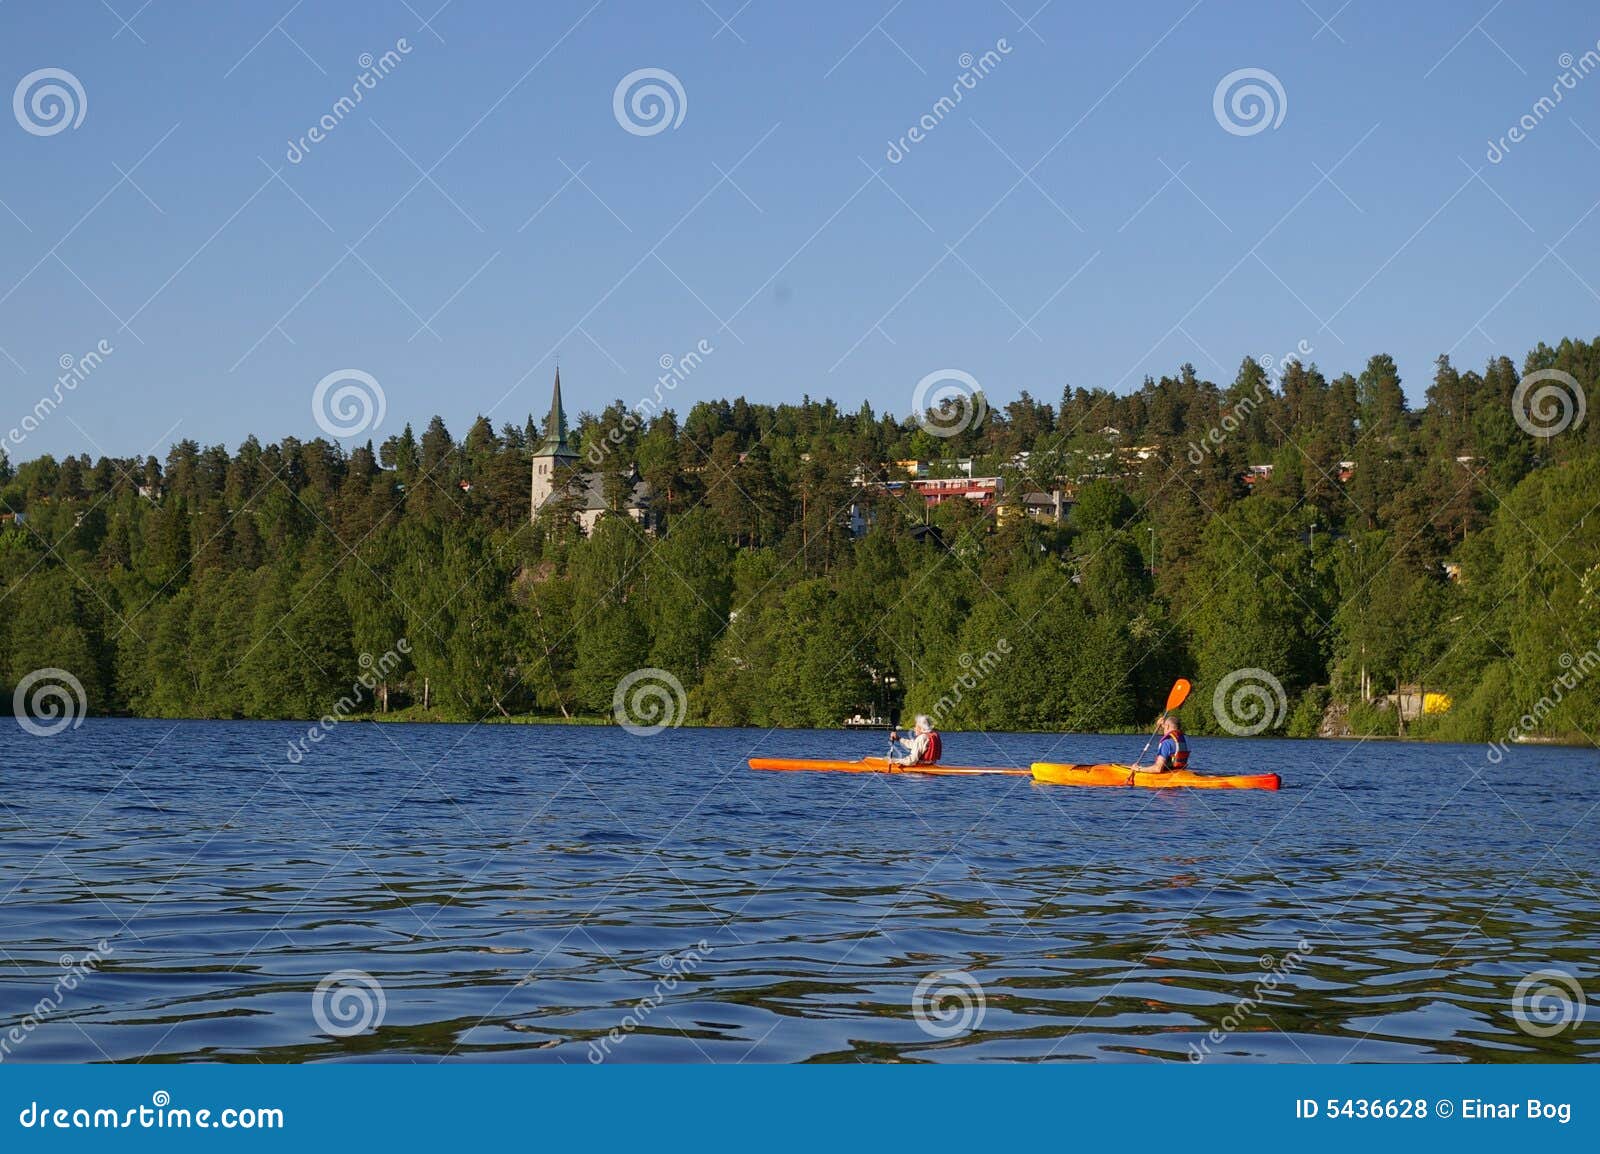 Scenic view of two canoeists on lake Kolbotnvannet, Akershus county ...